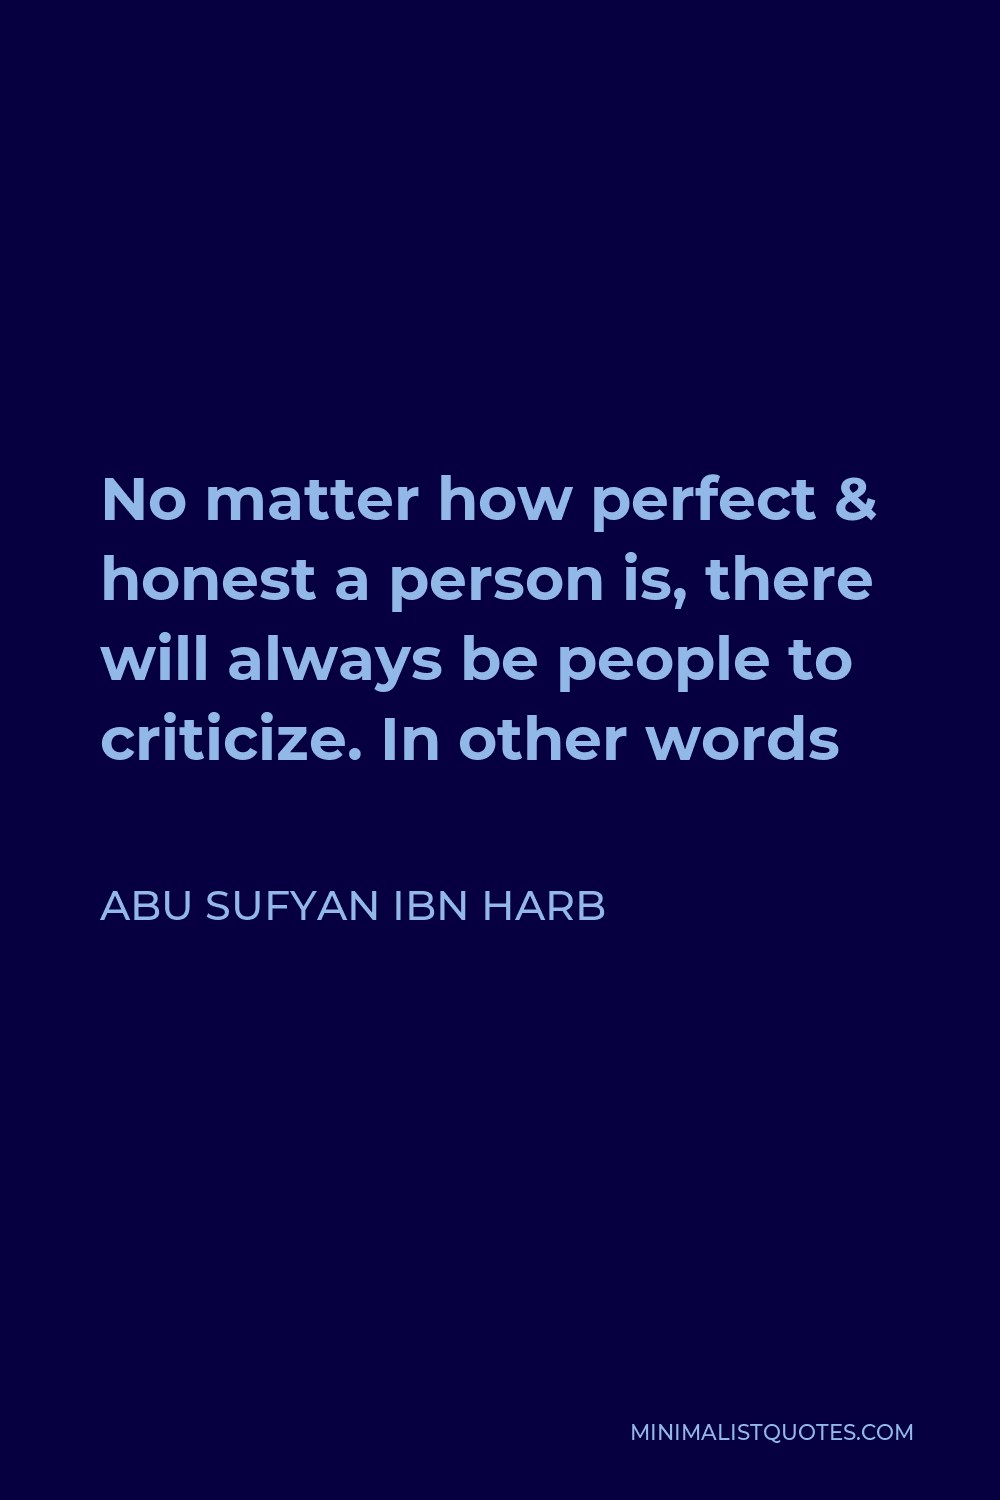 Abu Sufyan ibn Harb Quote - No matter how perfect & honest a person is, there will always be people to criticize. In other words